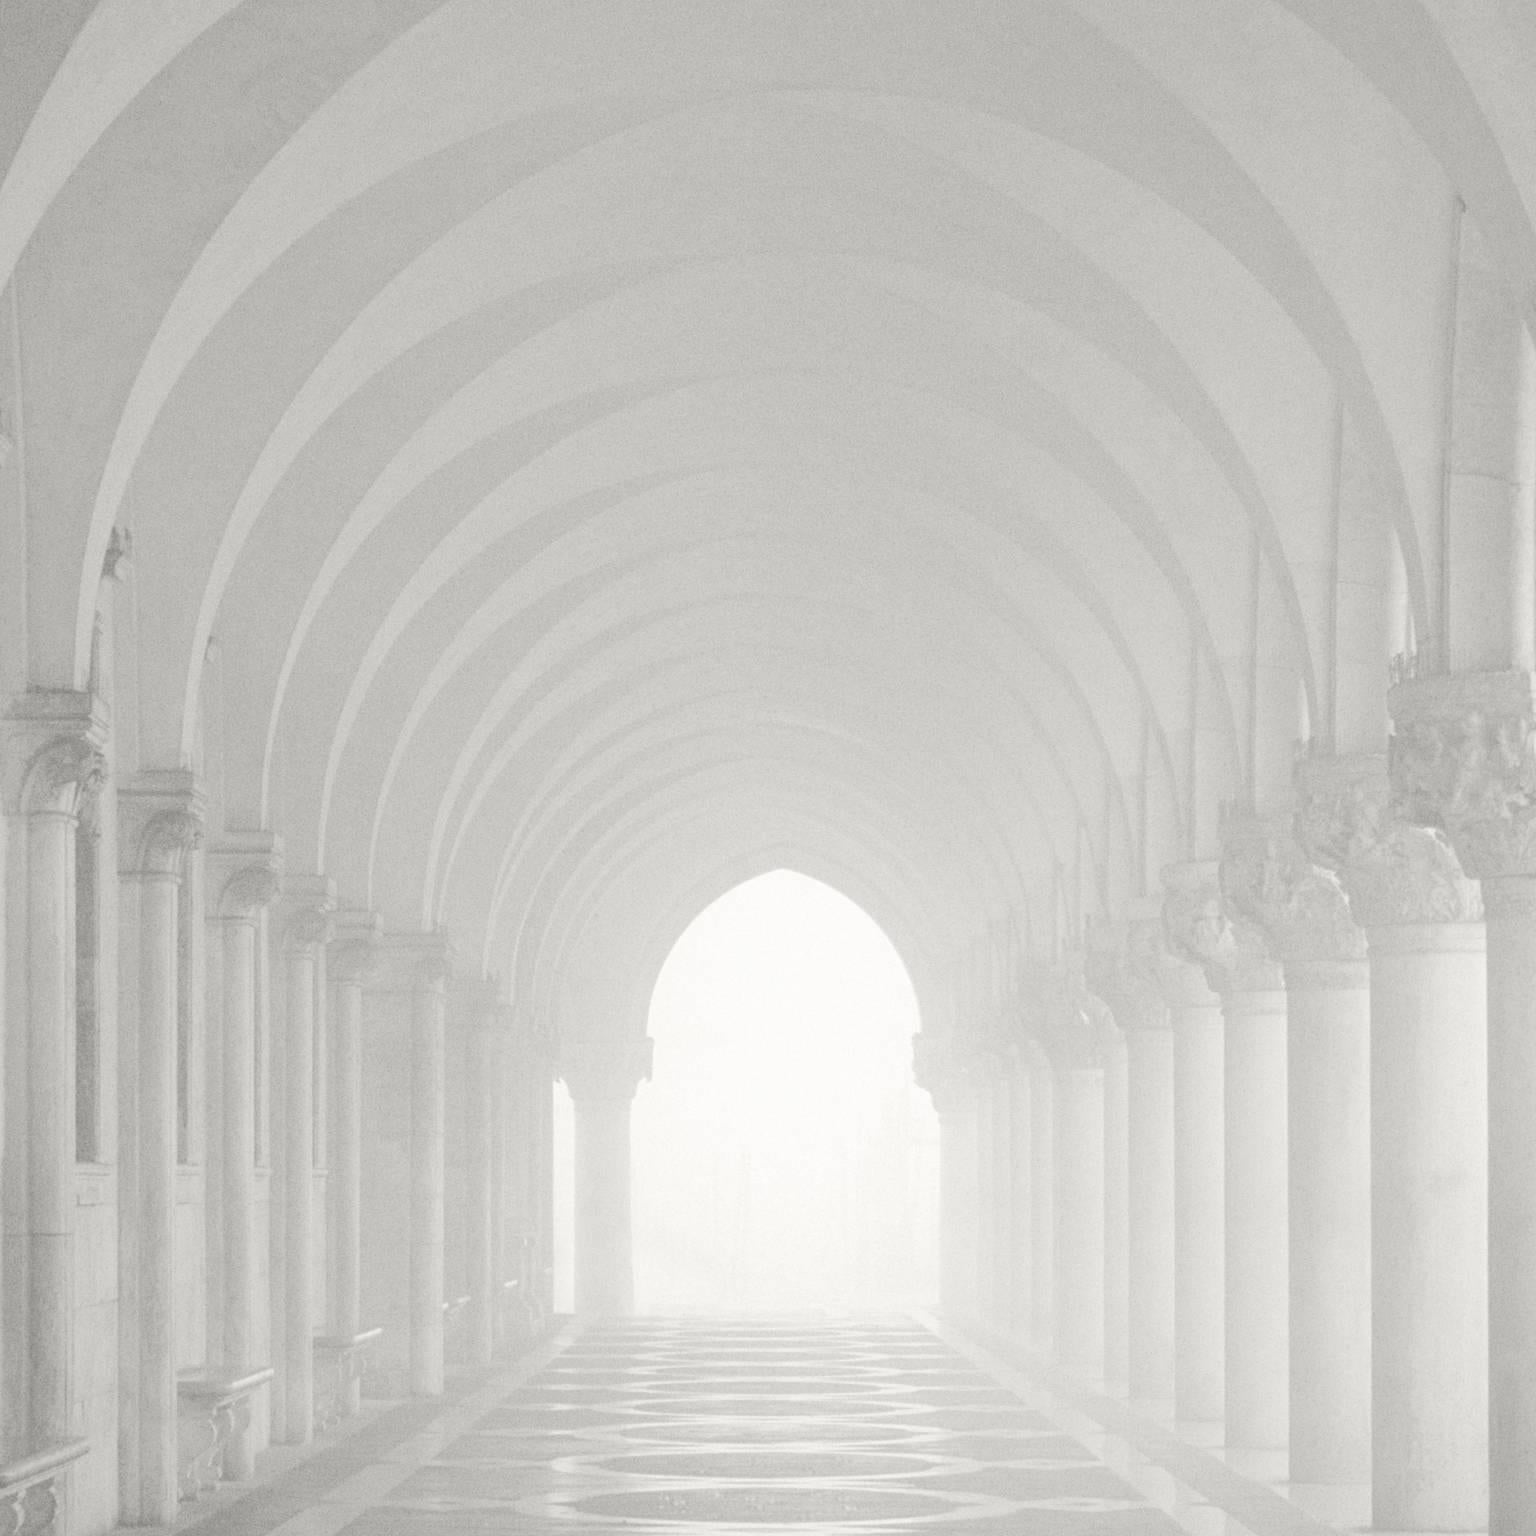 Arches, Doges Palace, Venice, Italy - Photograph by Massimo Di Lorenzo